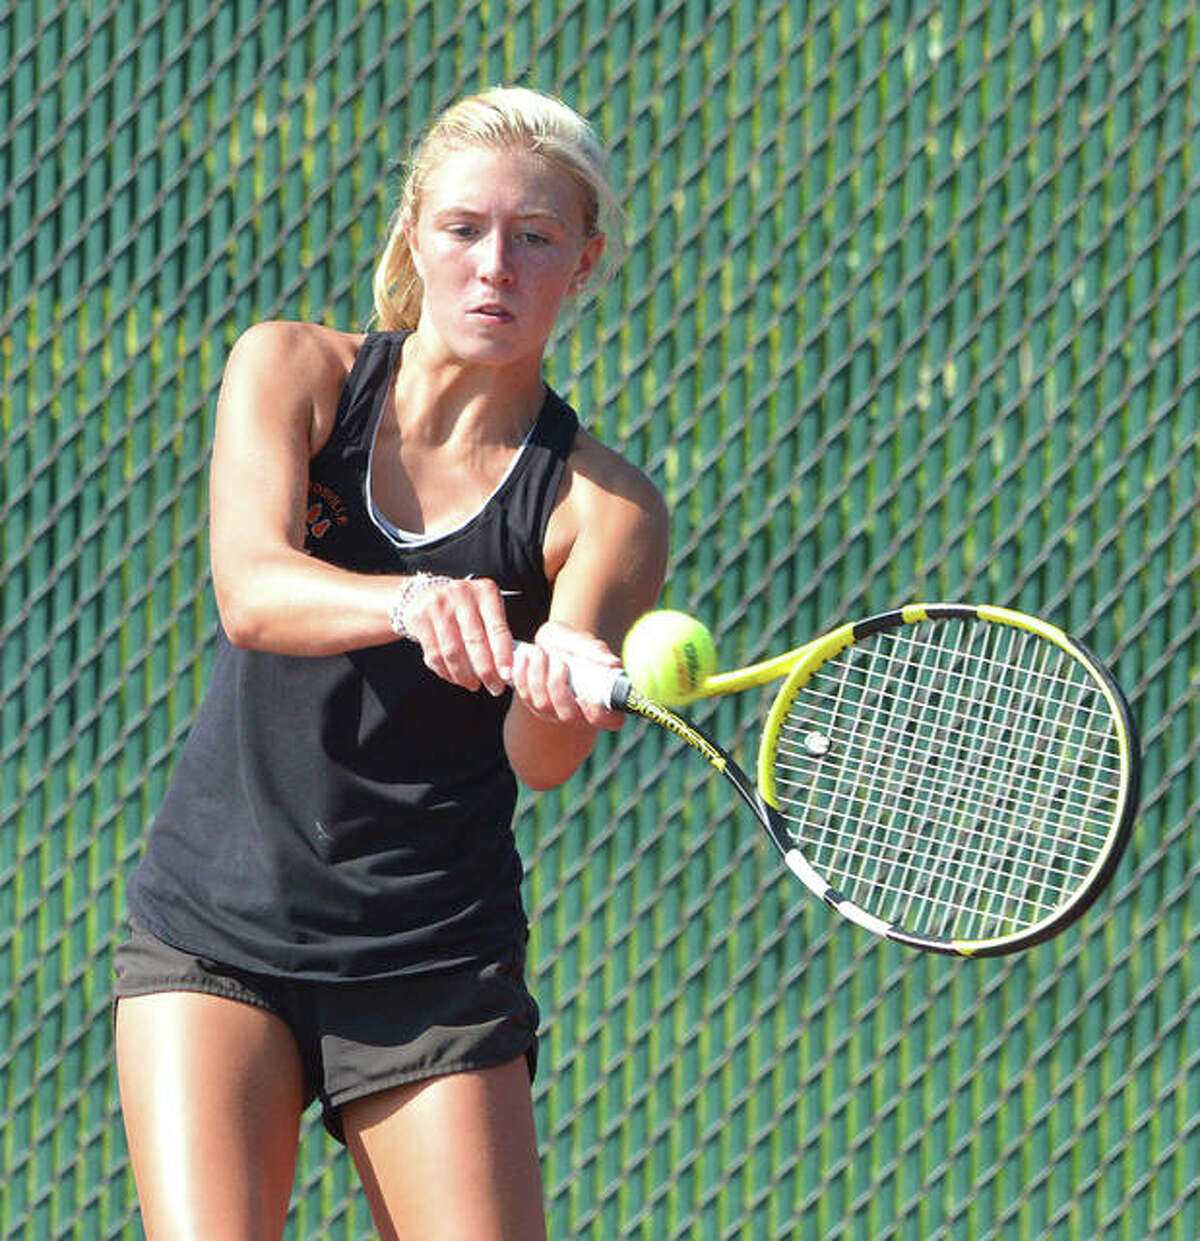 Edwardsville’s Emma Herman hits a two-handed backhand on Friday during her No. 3 doubles match against Maine South in the opening round of the Heather Bradshaw Memorial Invitational.